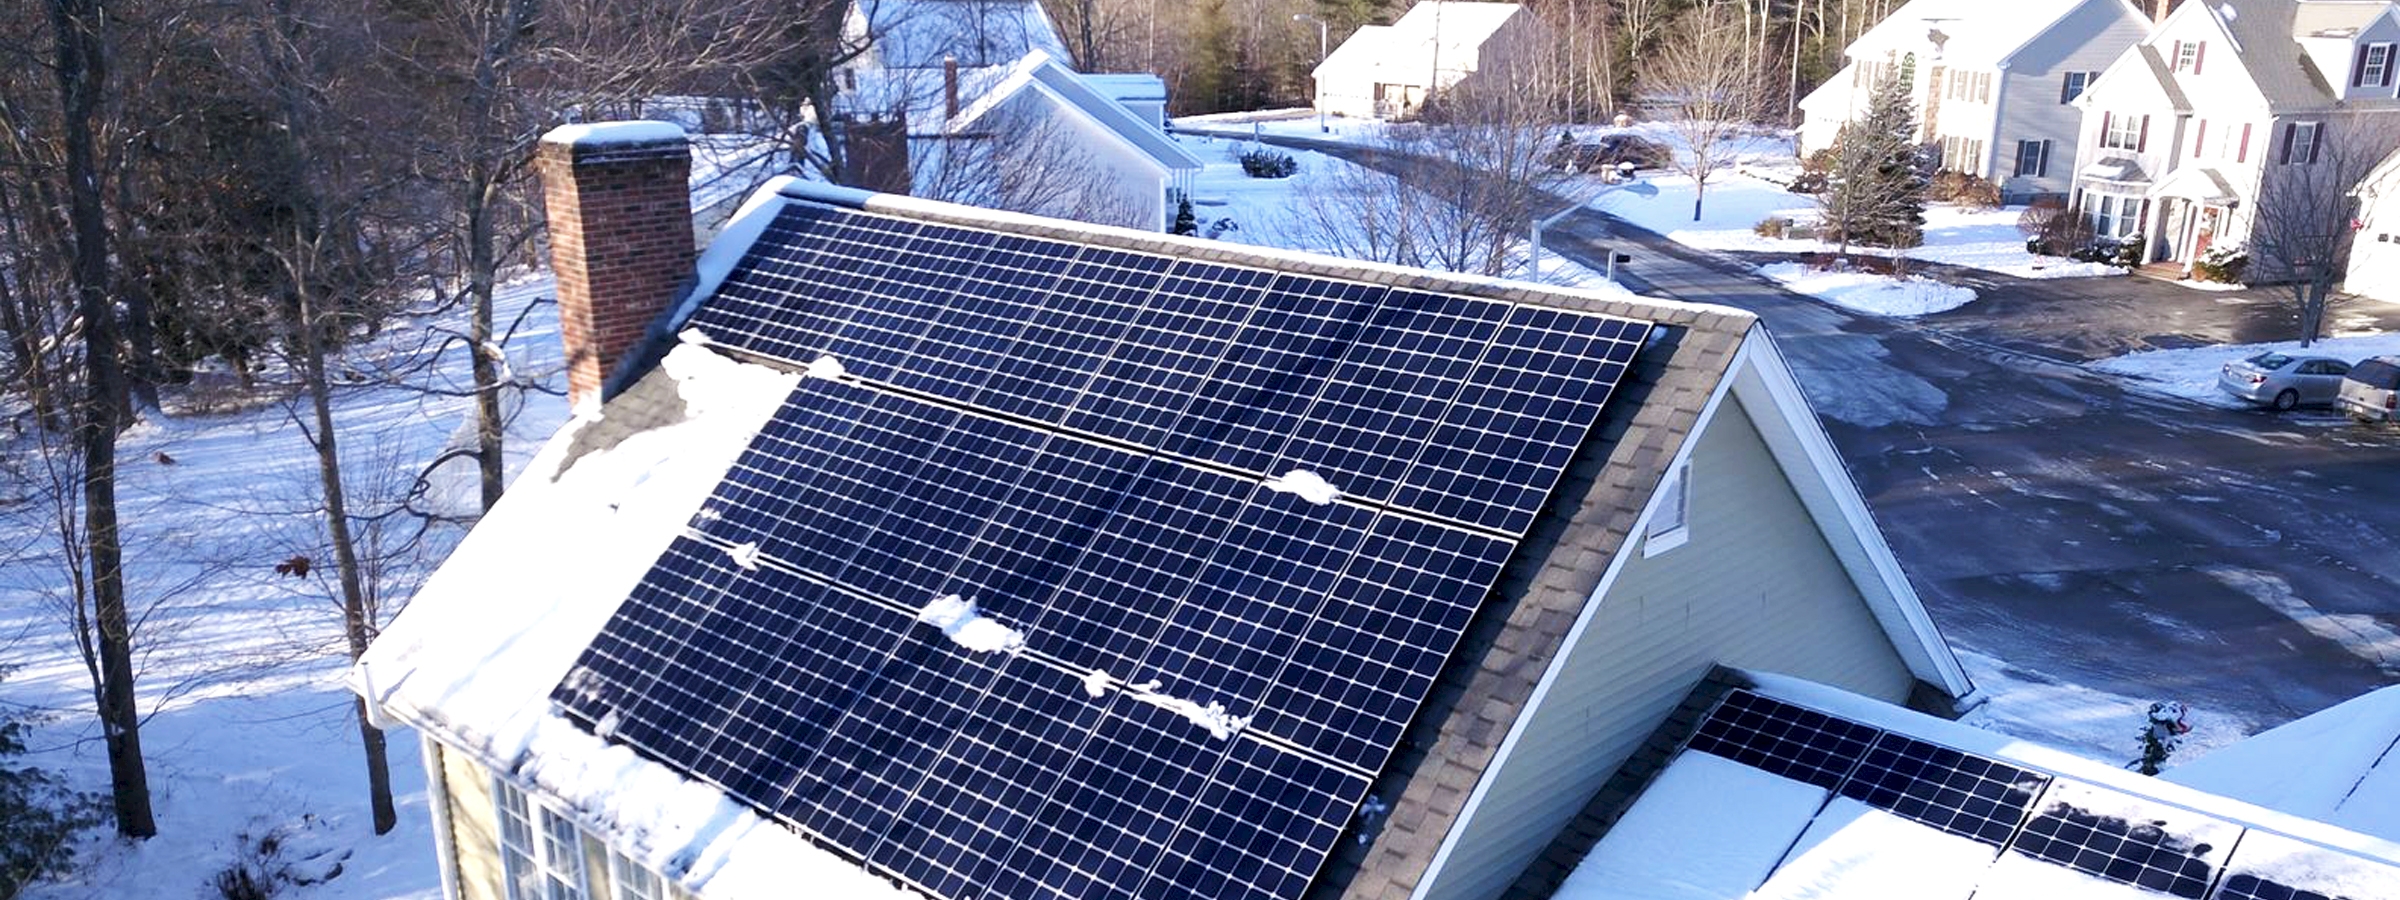 How much energy do solar panels produce in the winter?